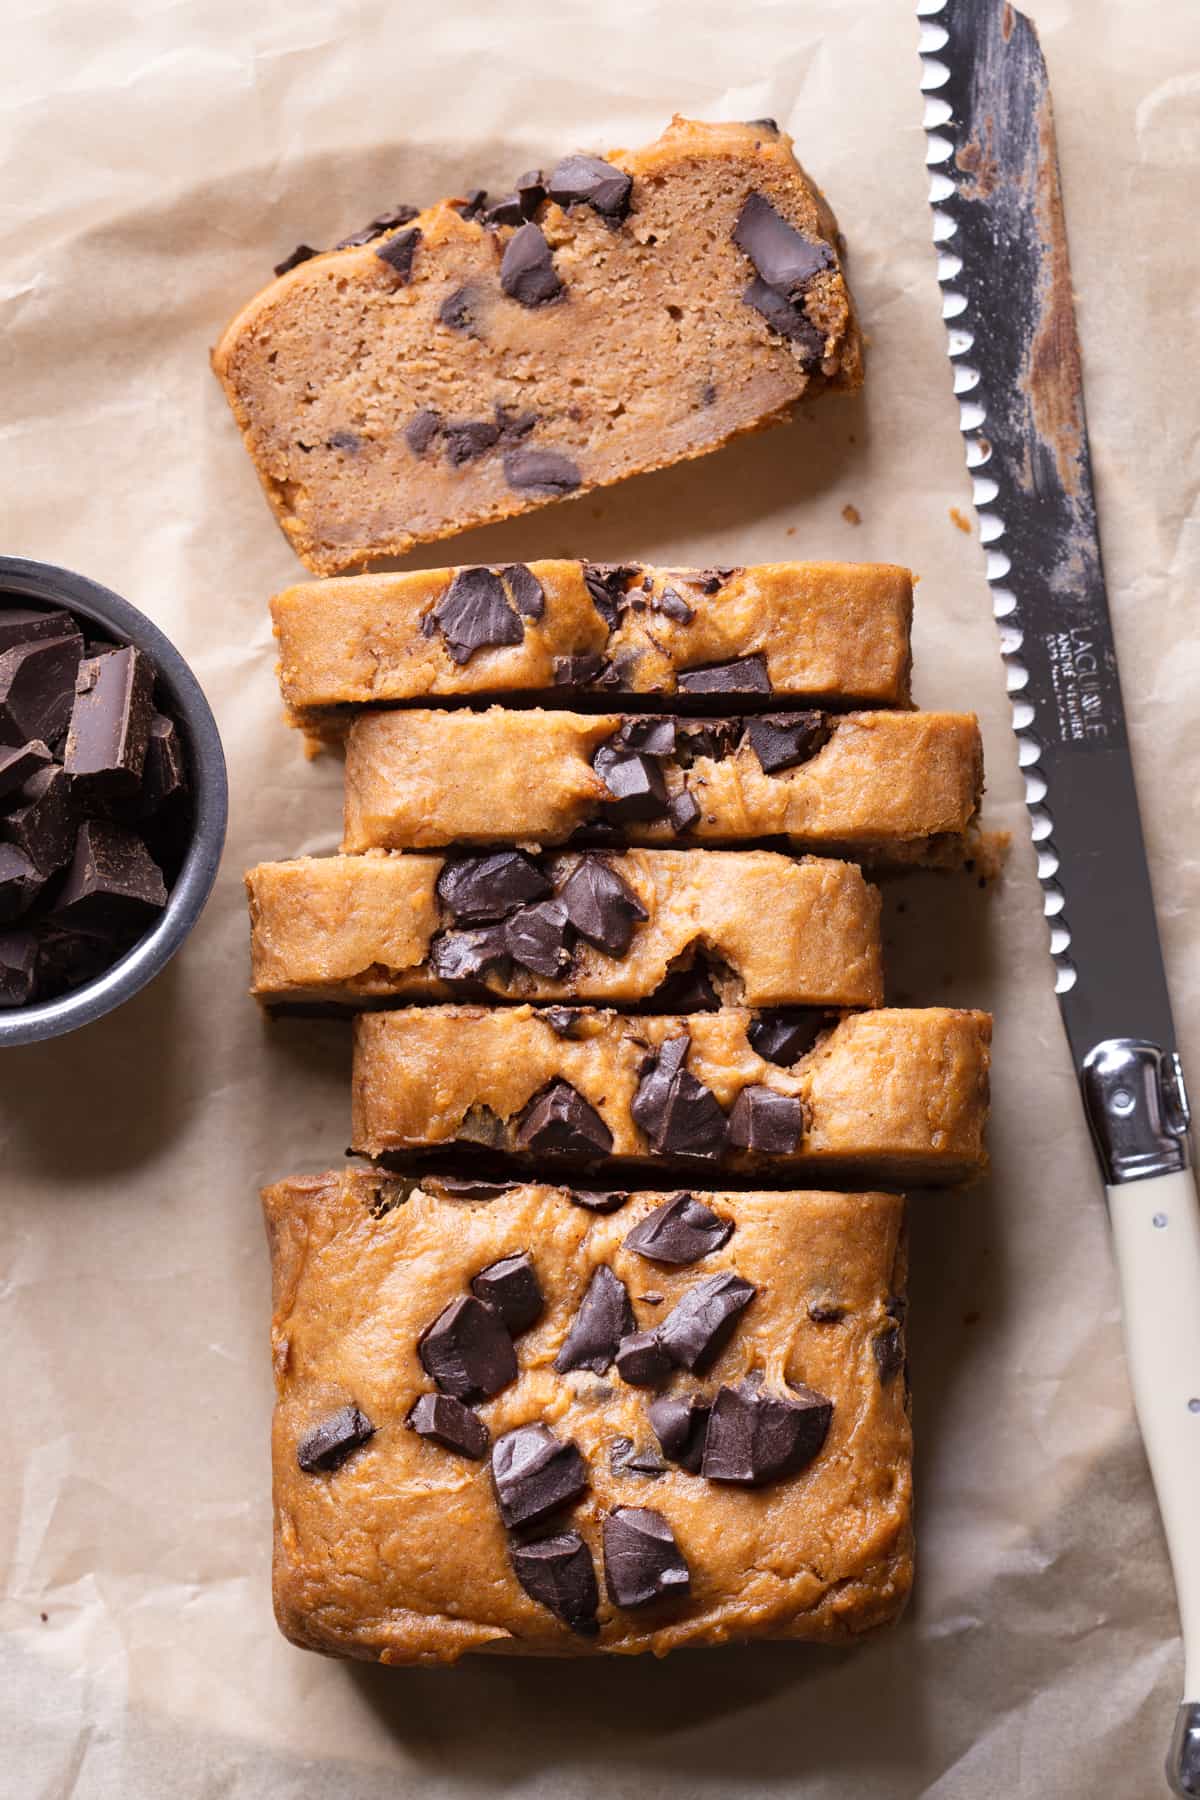 Gluten free and vegan sweet potato bread with chocolate chips, cut into slices